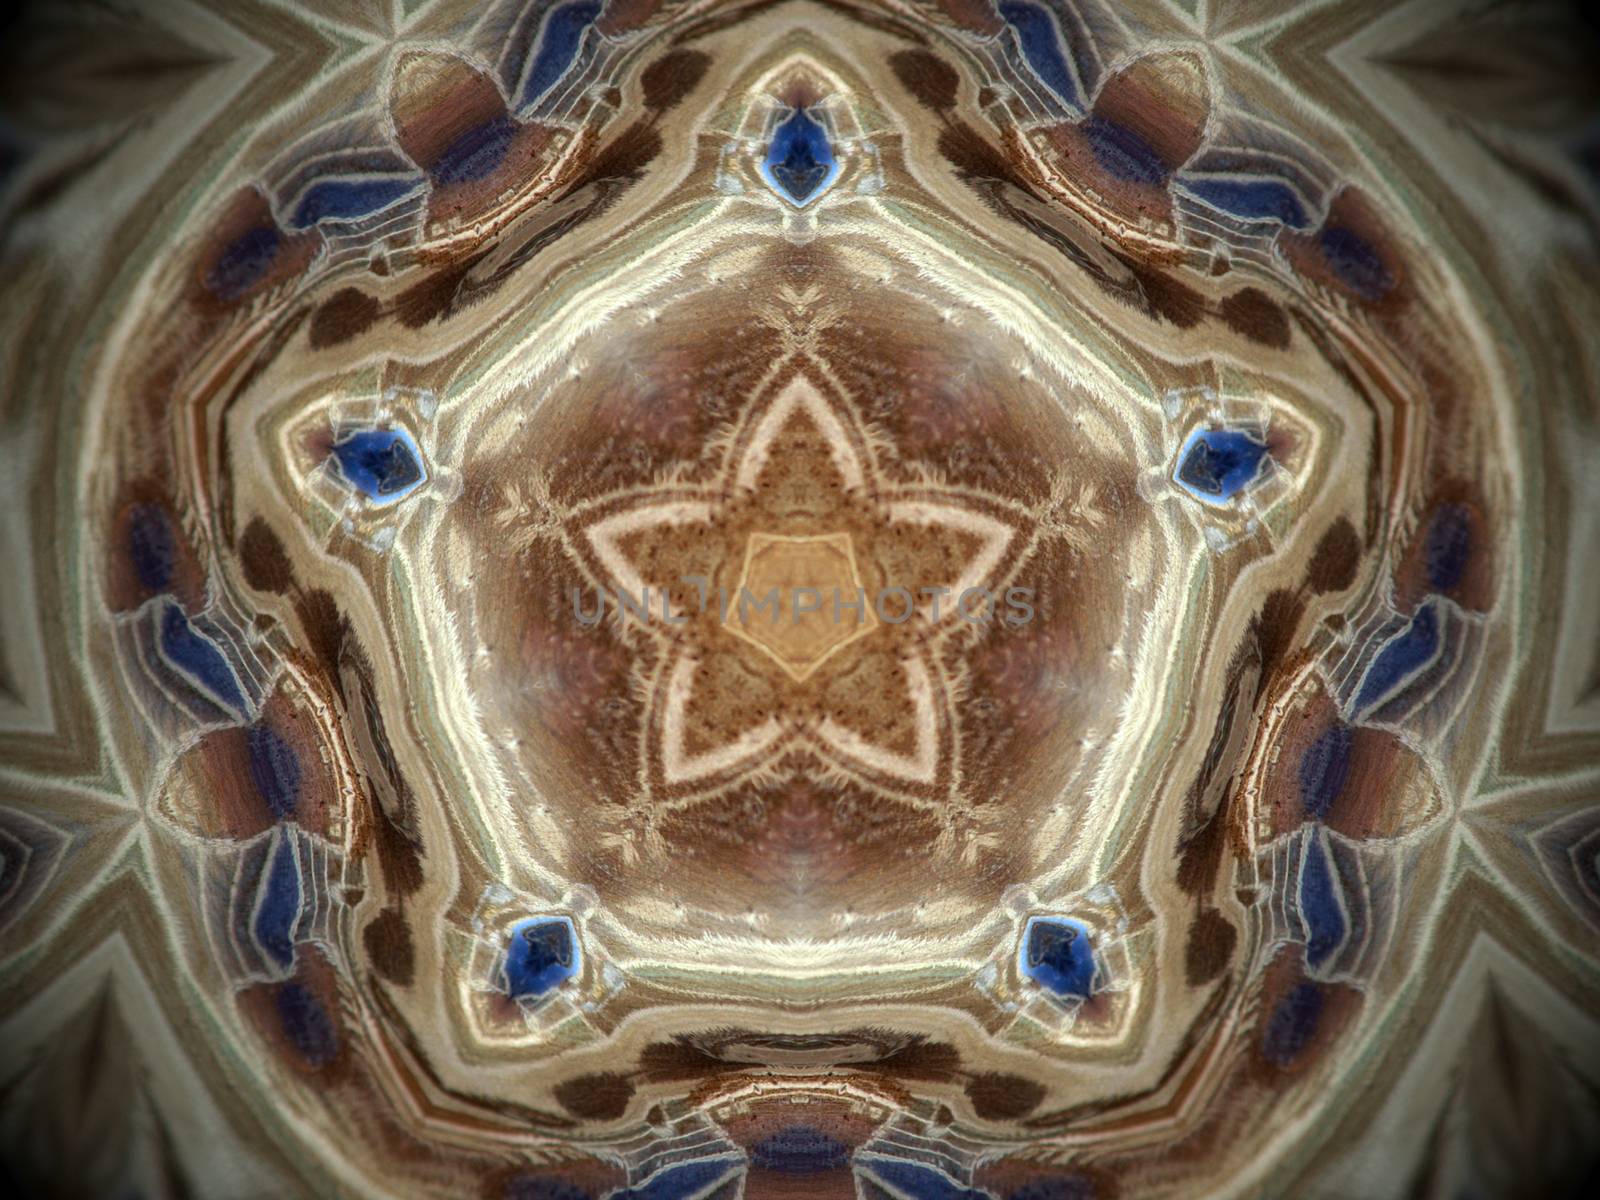 Fractal kaleidoscope background with images forming a star-shaped pattern